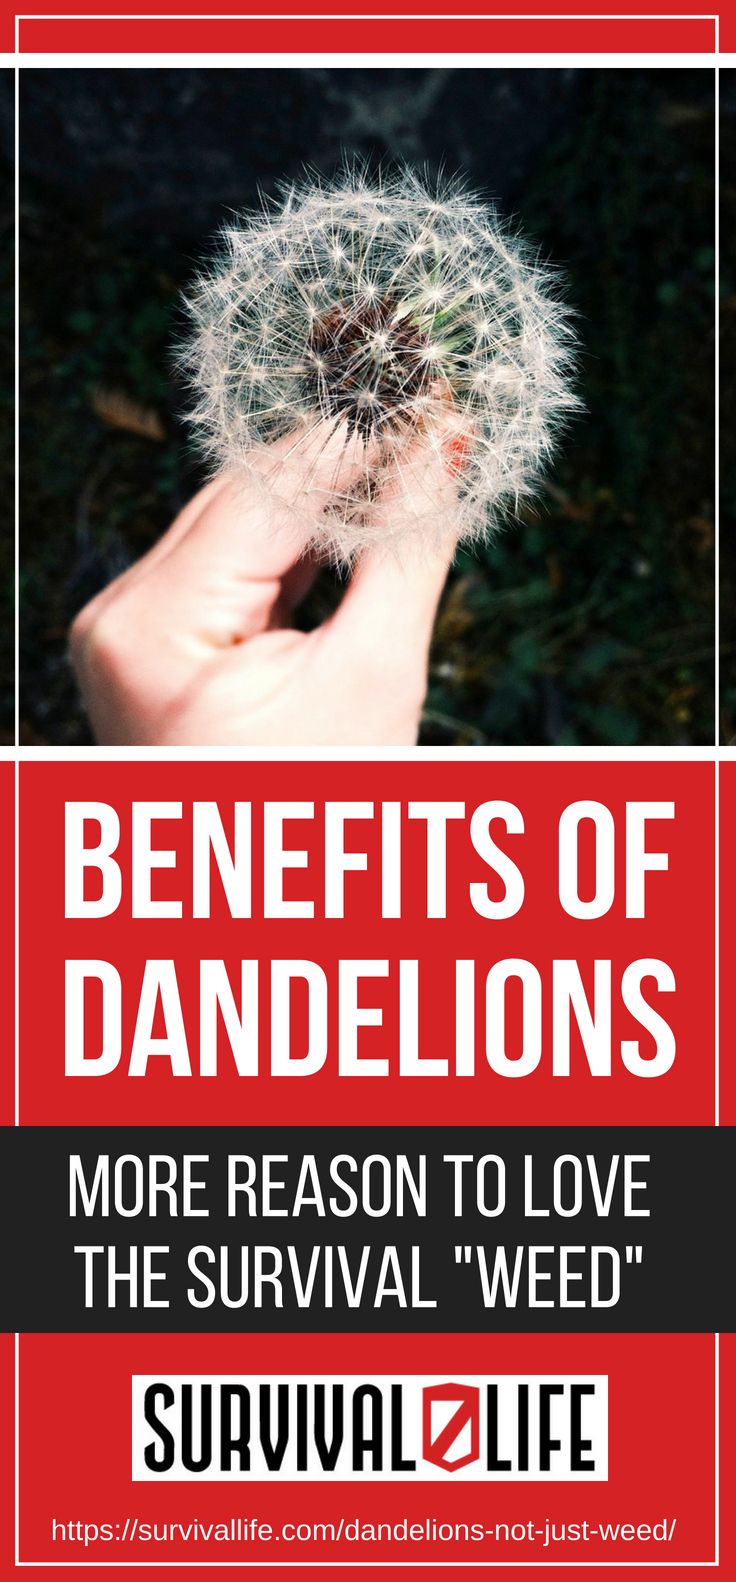 Placard | Benefits Of Dandelions | More Reasons To Love The Survival "Weed"